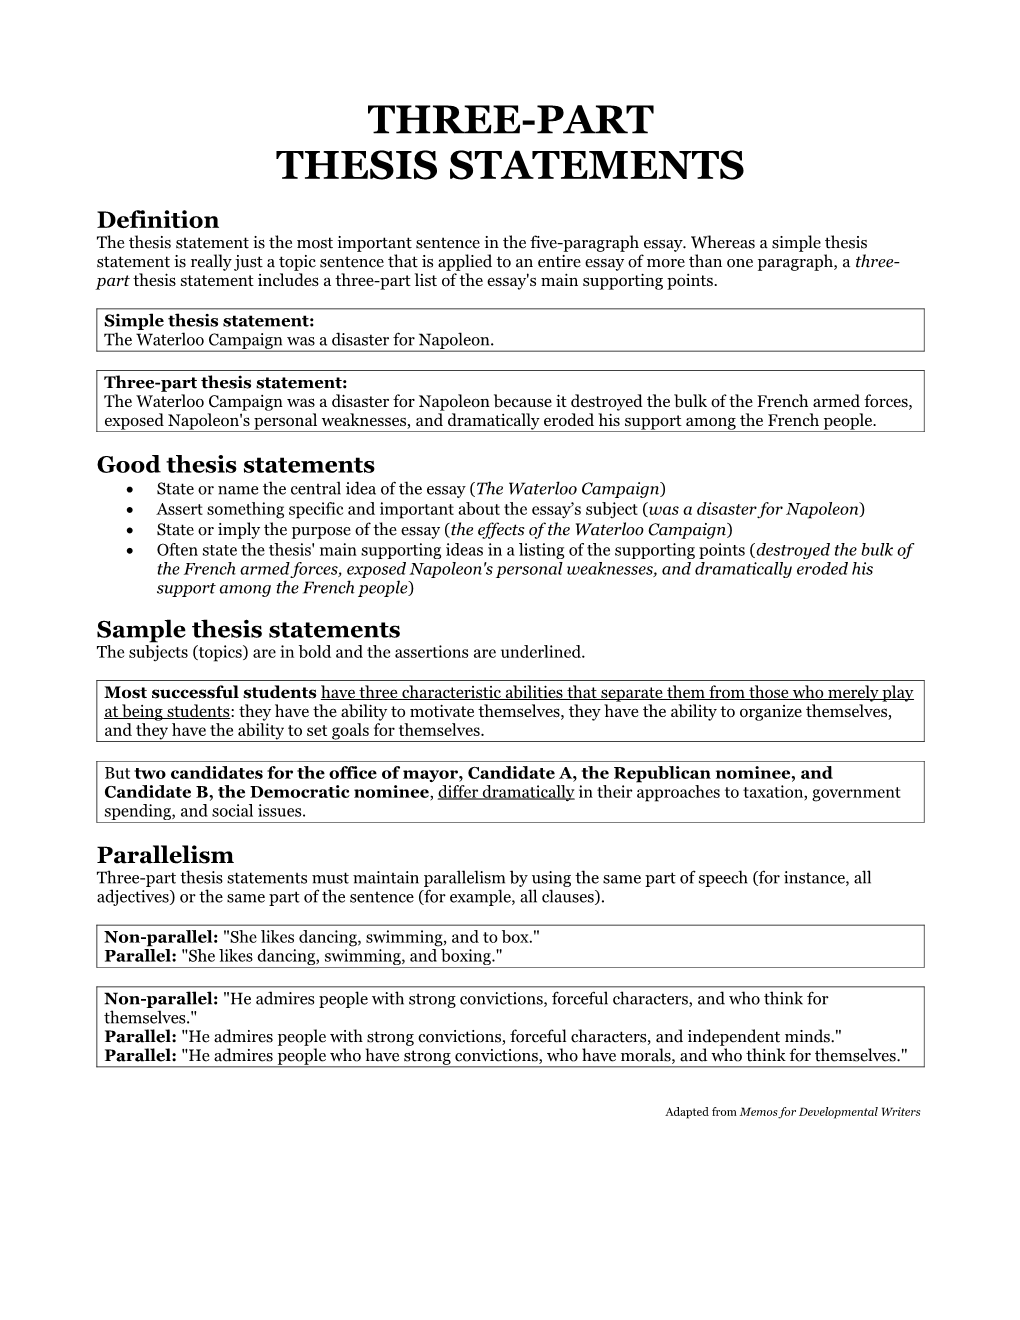 Thesis Statements s1